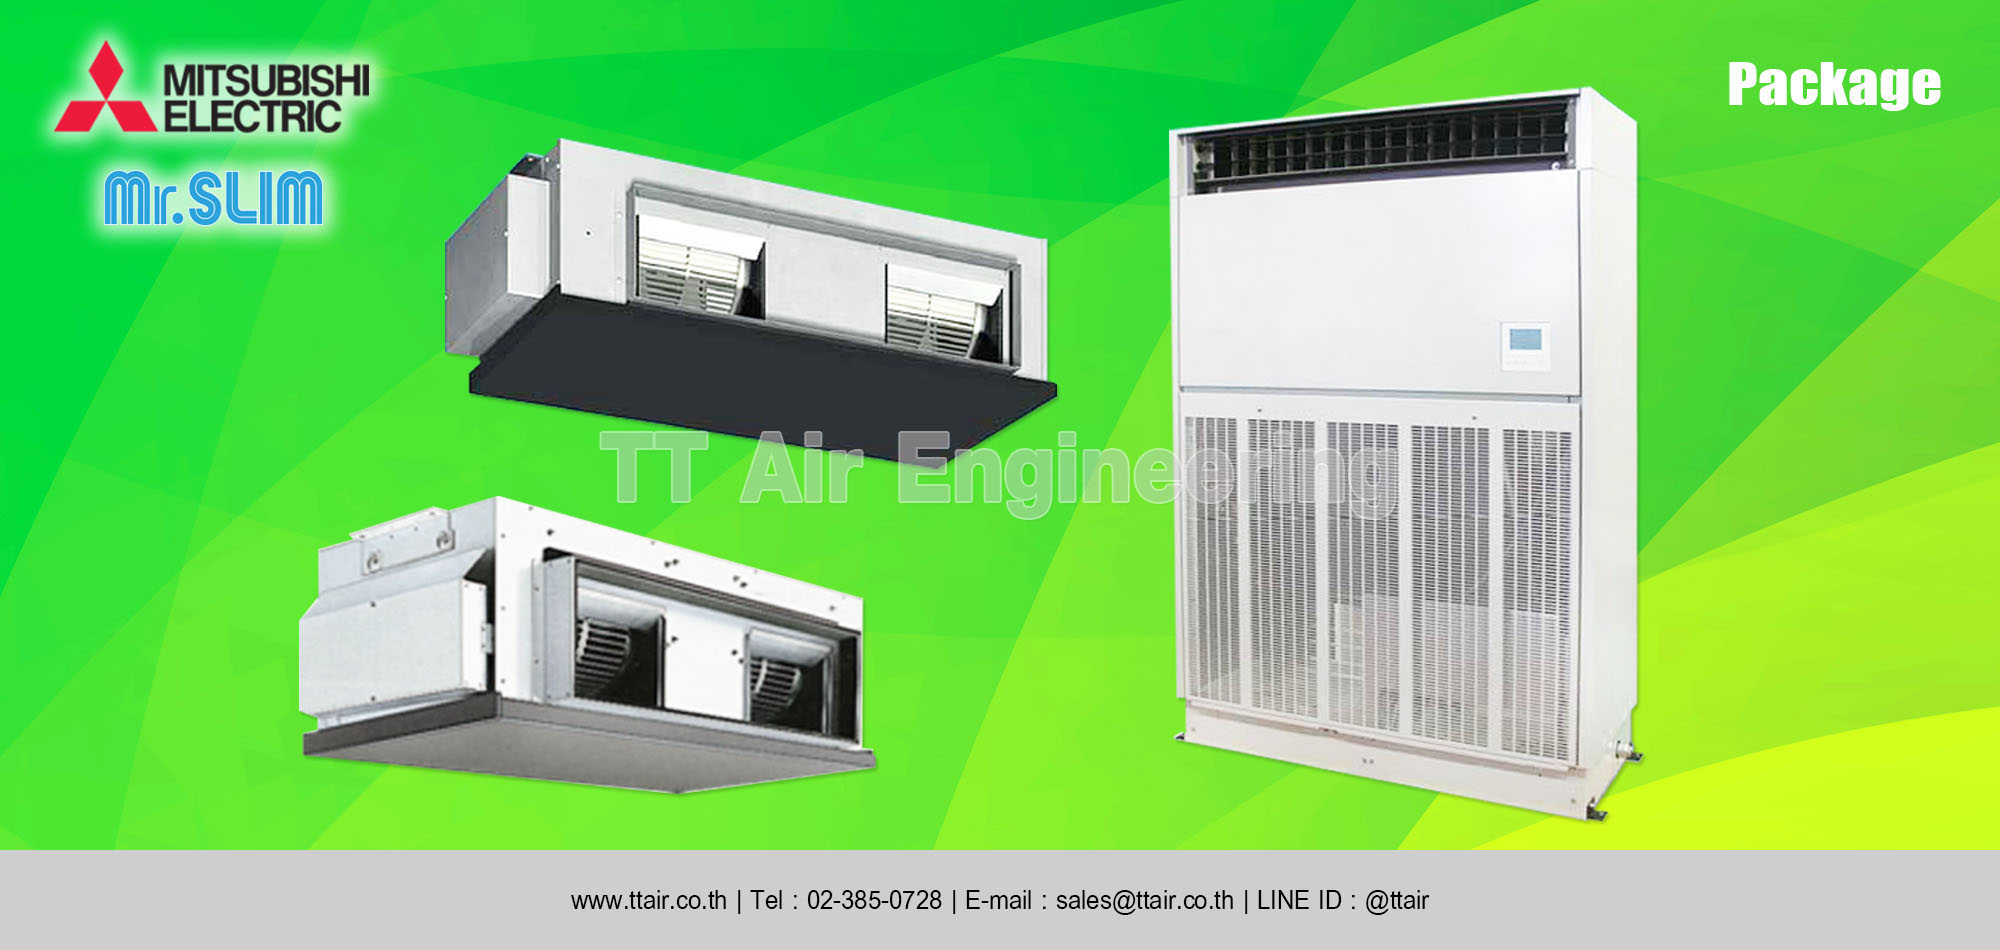 MITSUBISHI ELECTRIC Package category (1)